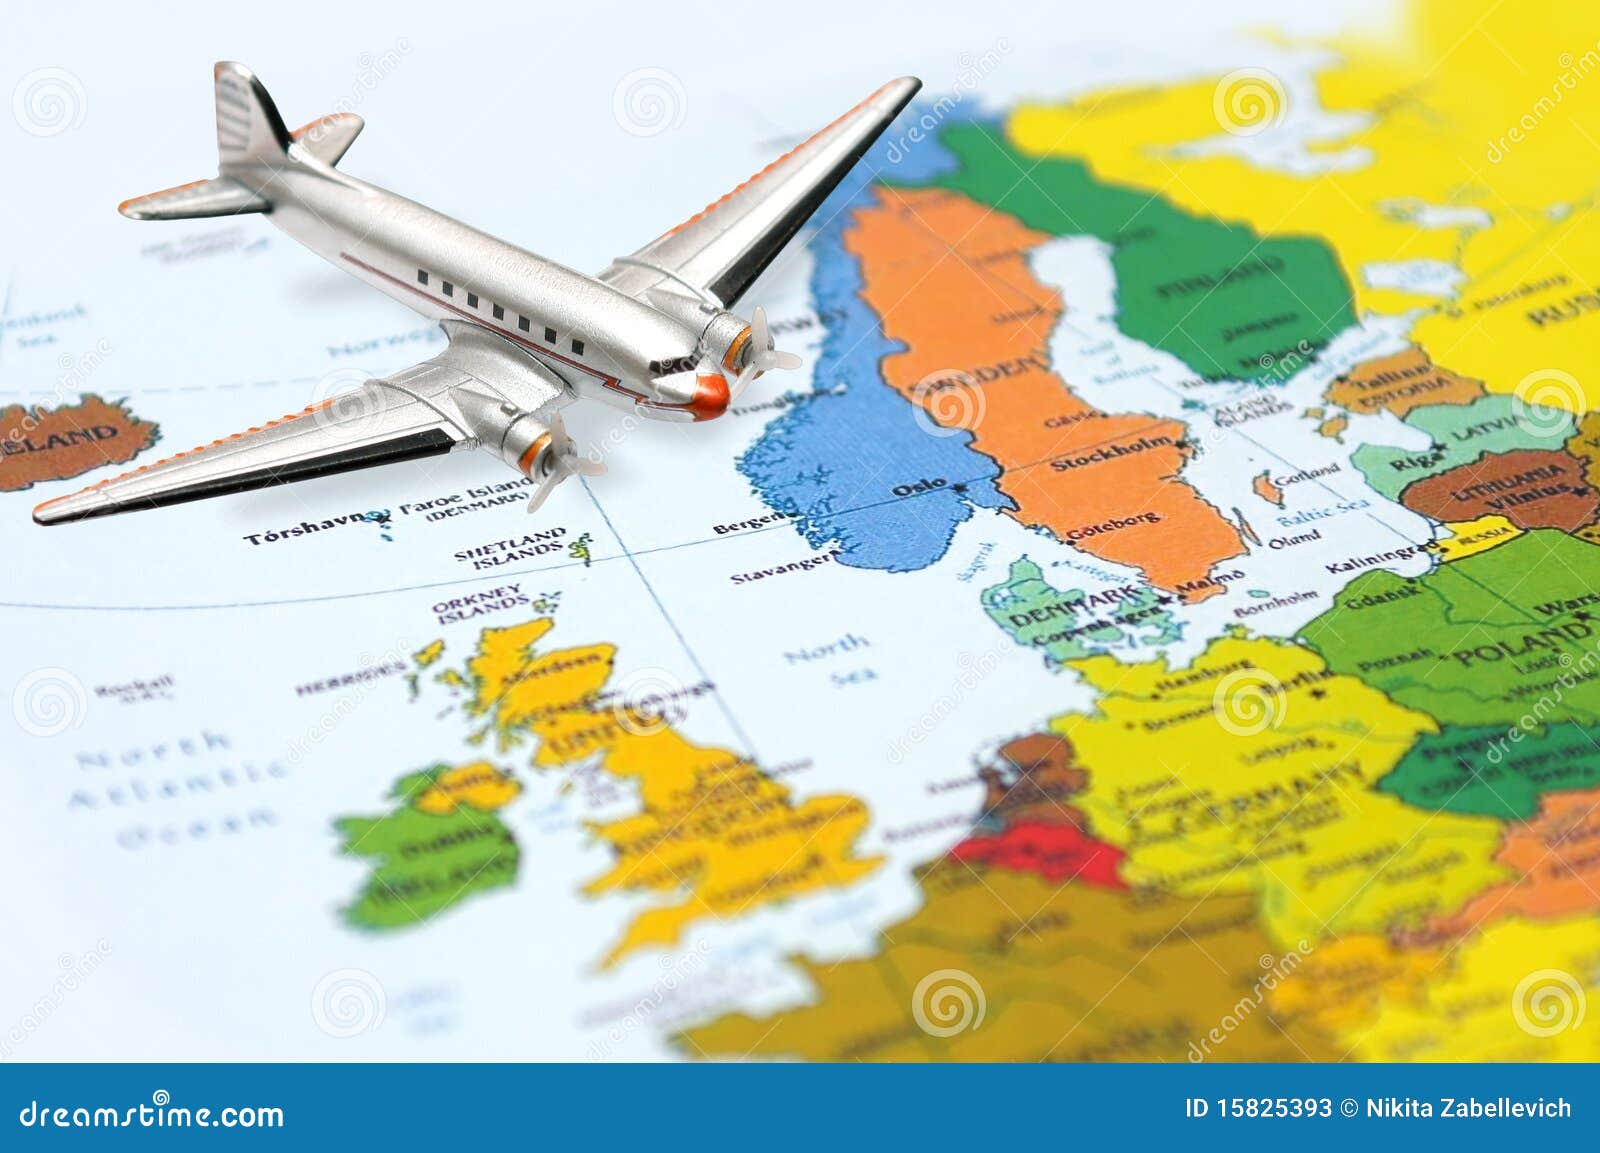 Fly To Europe Stock Photos - Image: 15825393